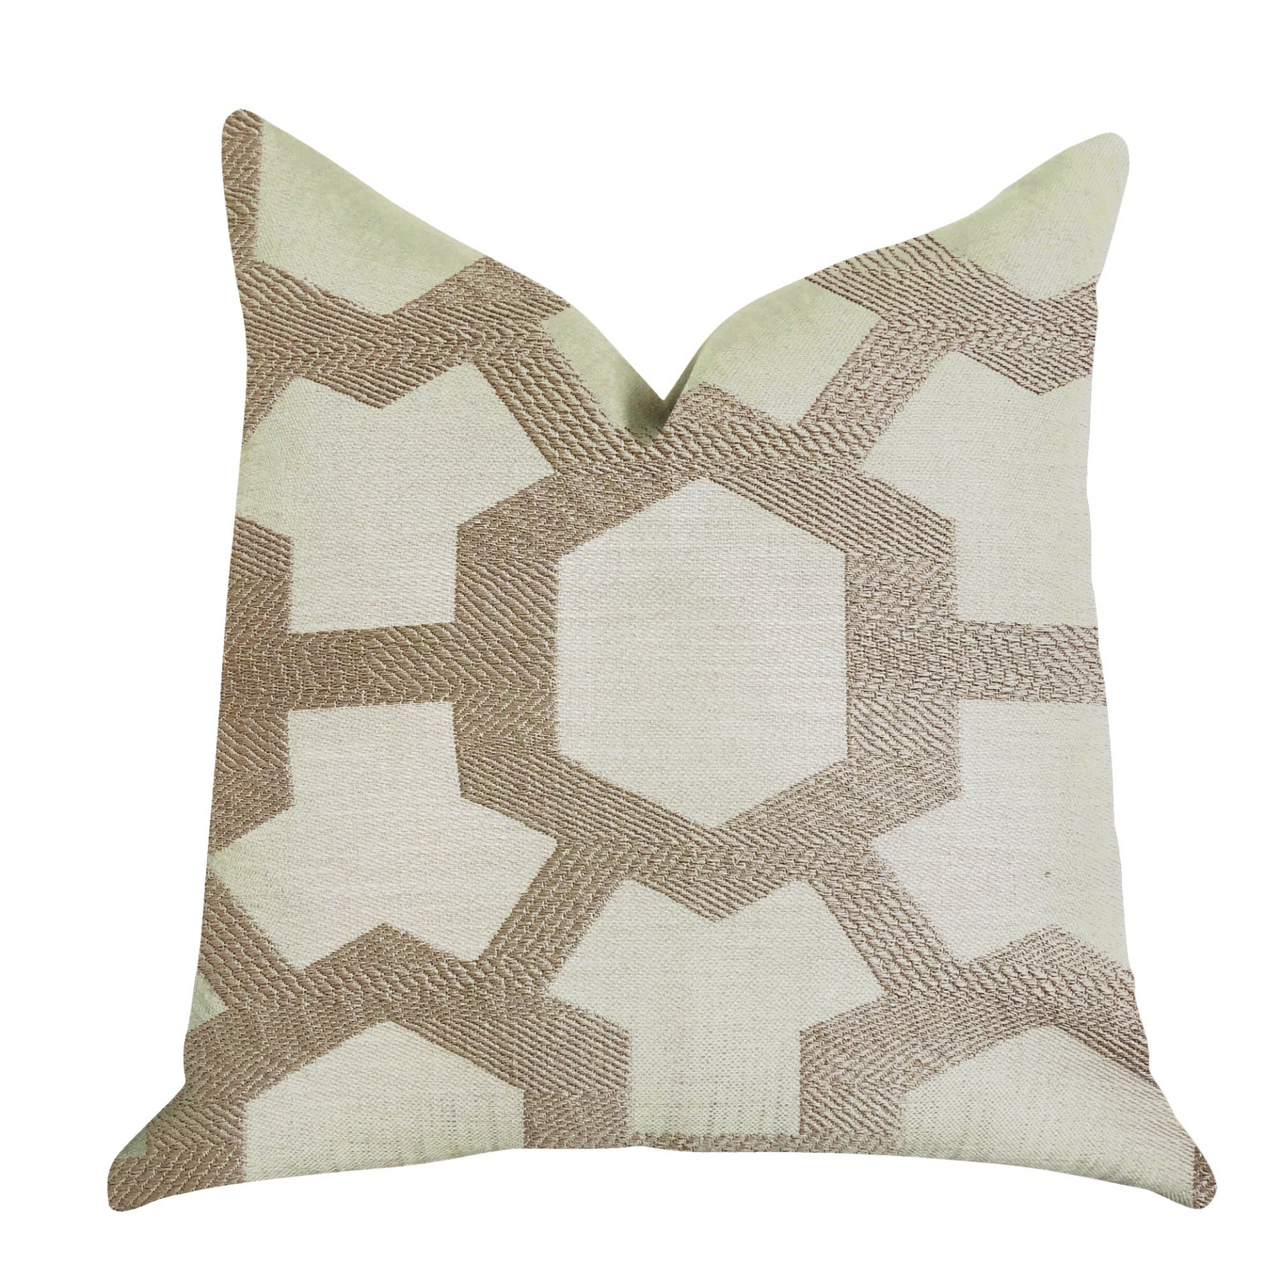 Linked Charisma Luxury Throw Pillow in Beige and Brown Tones